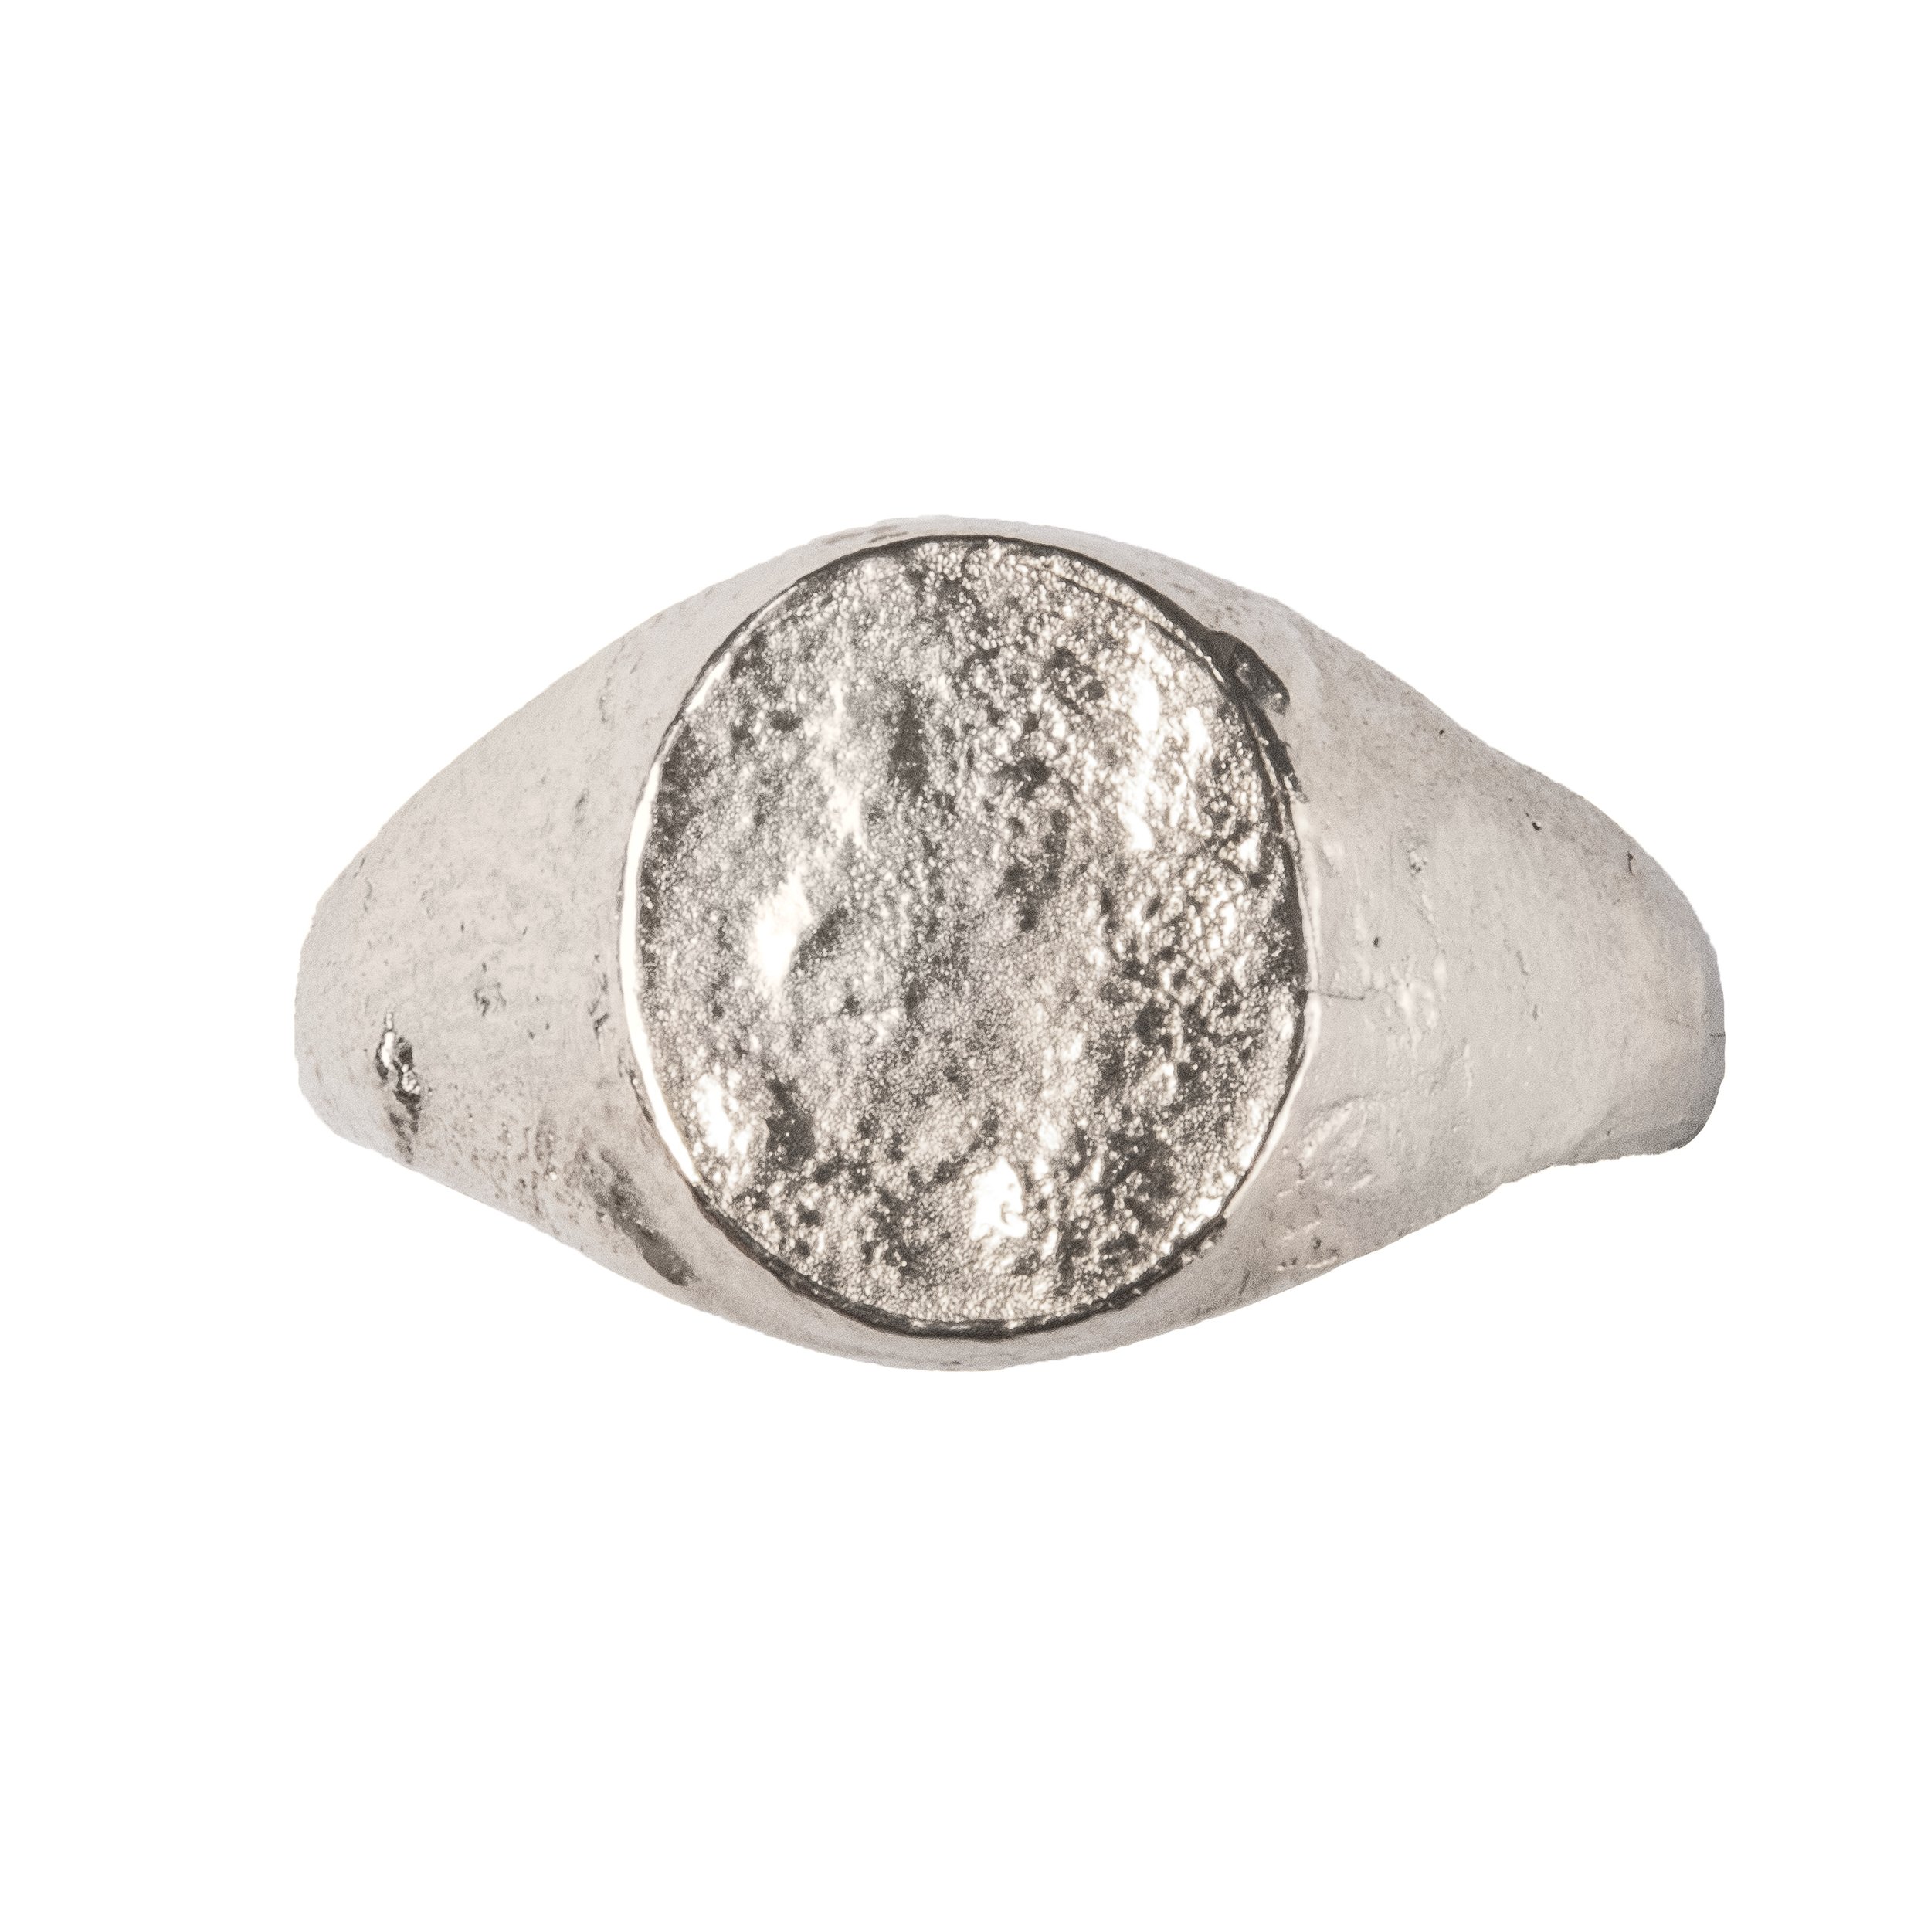 18ct white gold light weight signet ring